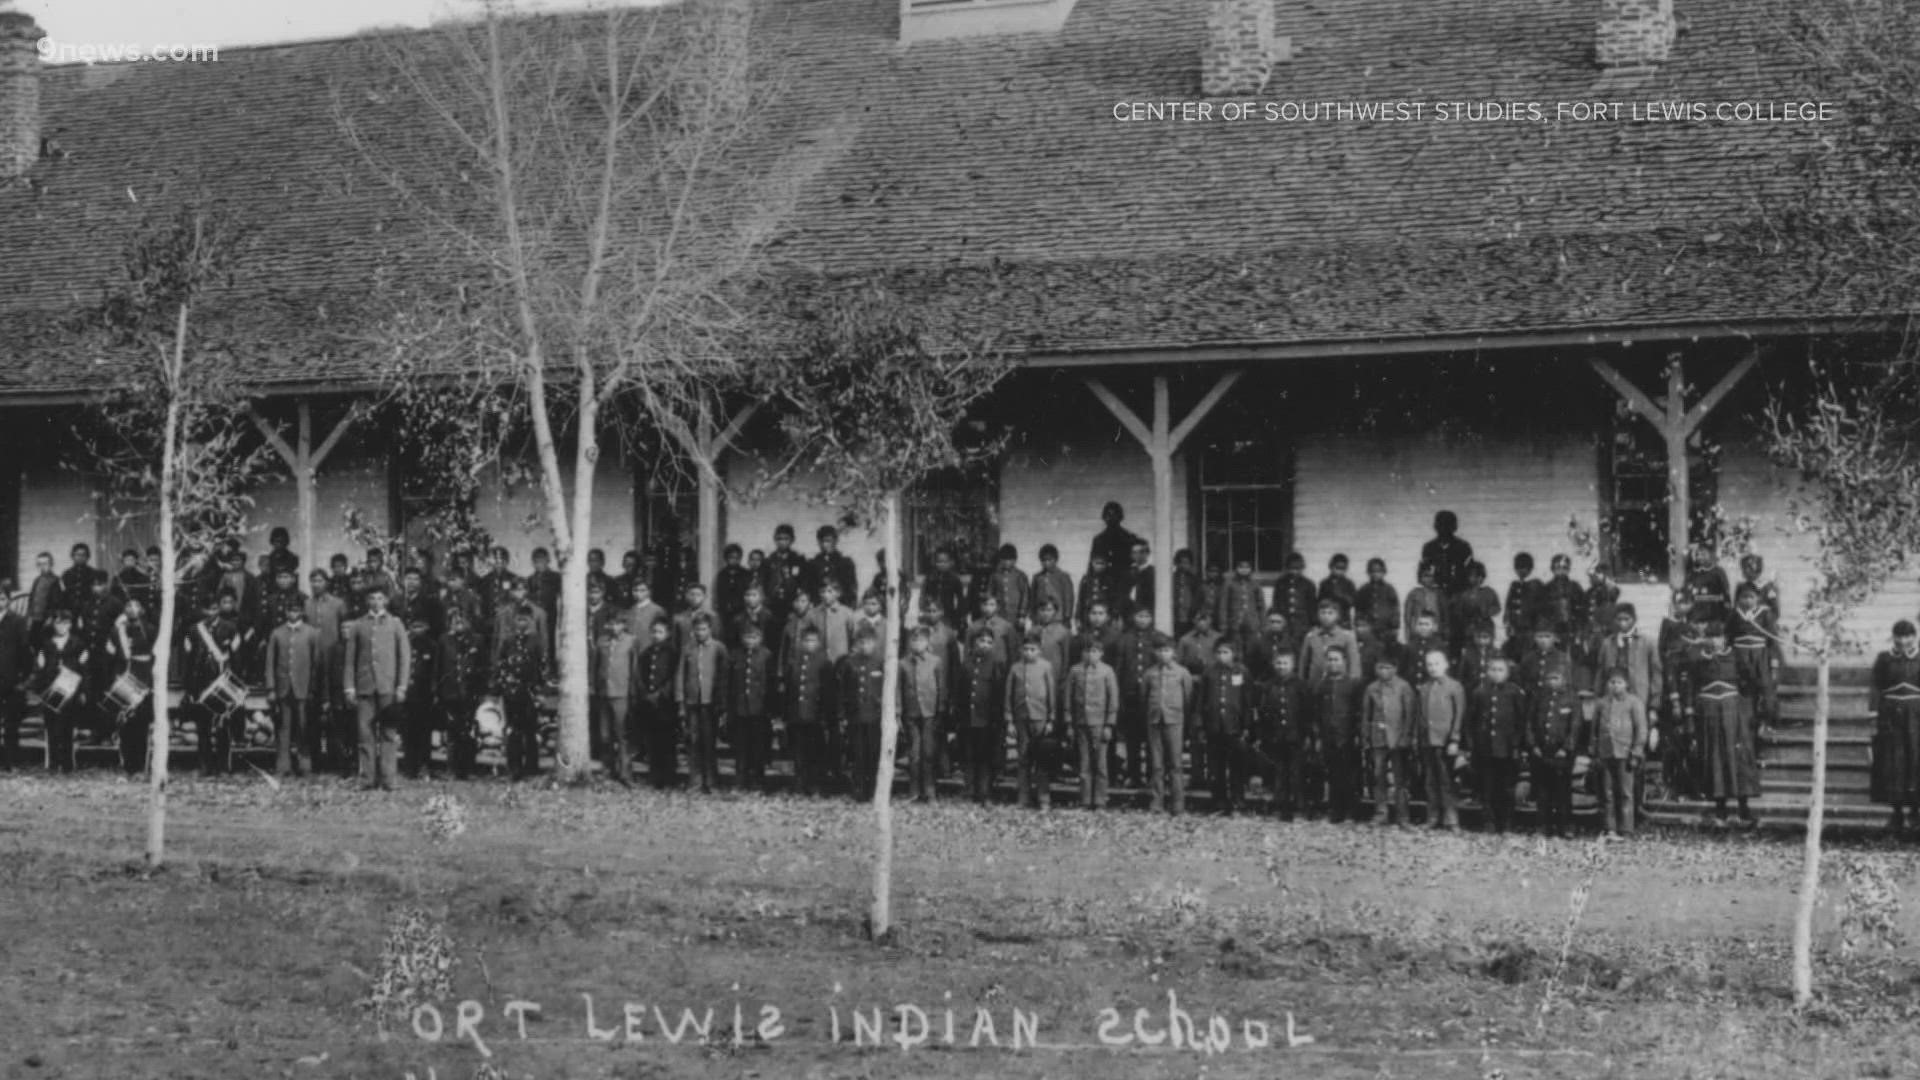 Officials at Fort Lewis College began removing plaques depicting a false narrative of Native American children at what was once an Indigenous boarding school.